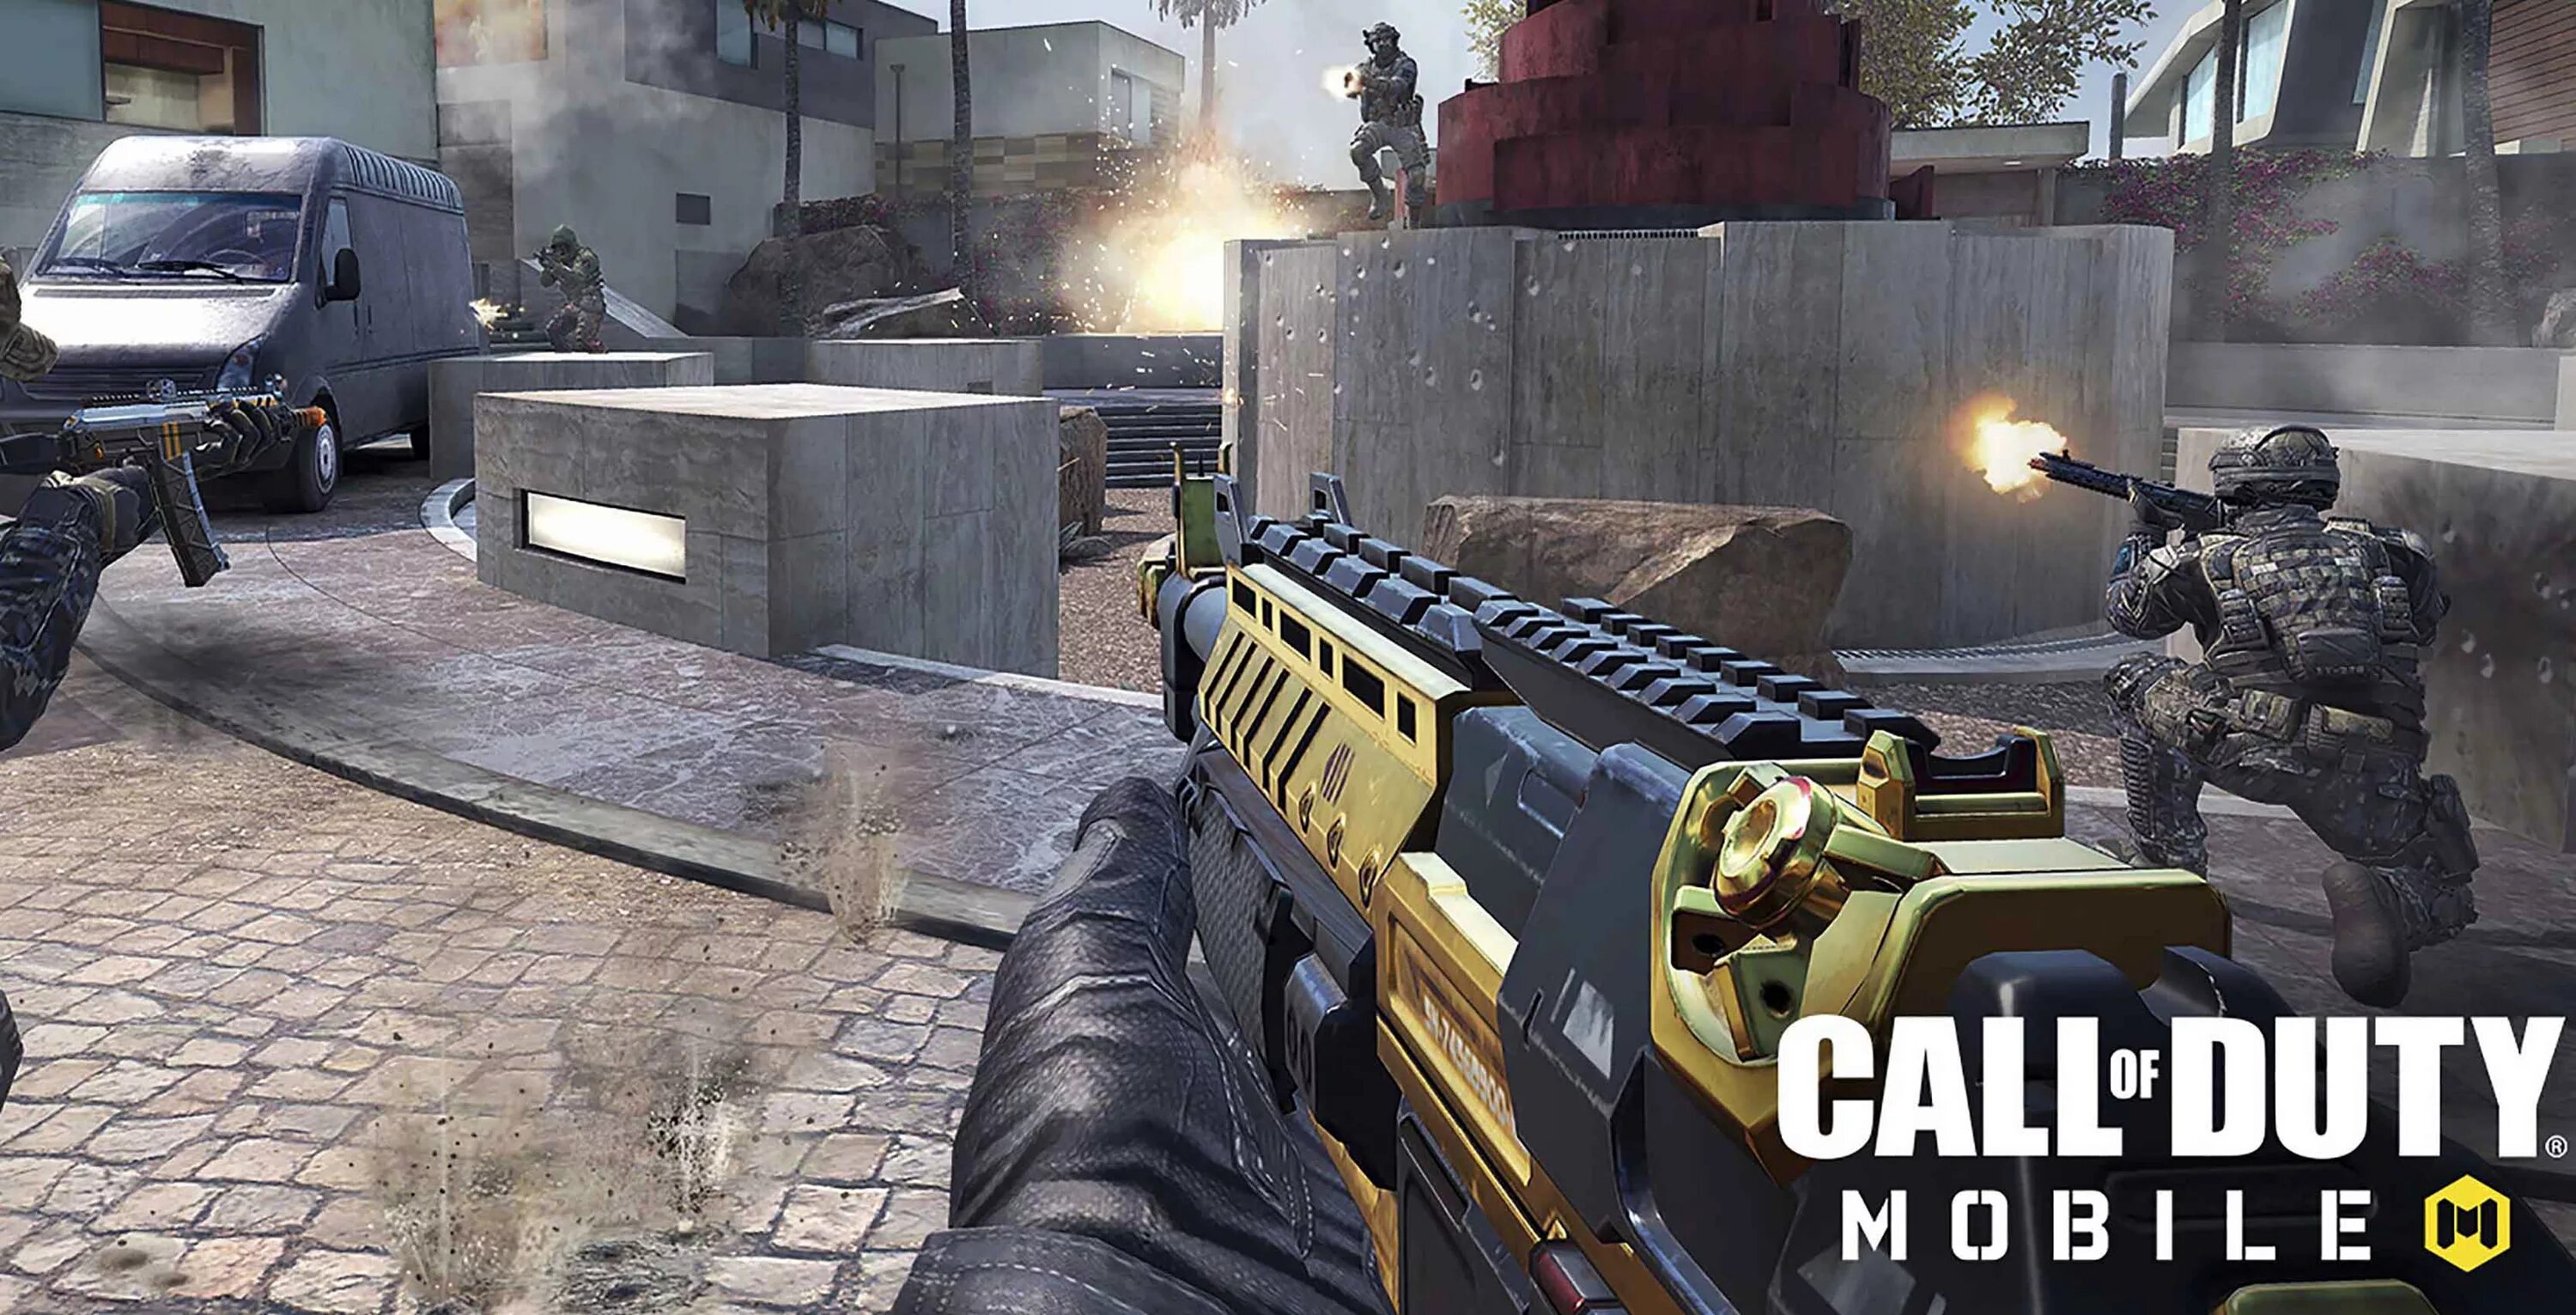 Call of Duty mobile. Игра Call of Duty mobile 2. Call of Duty mobile mobile. Call of Duty 8.